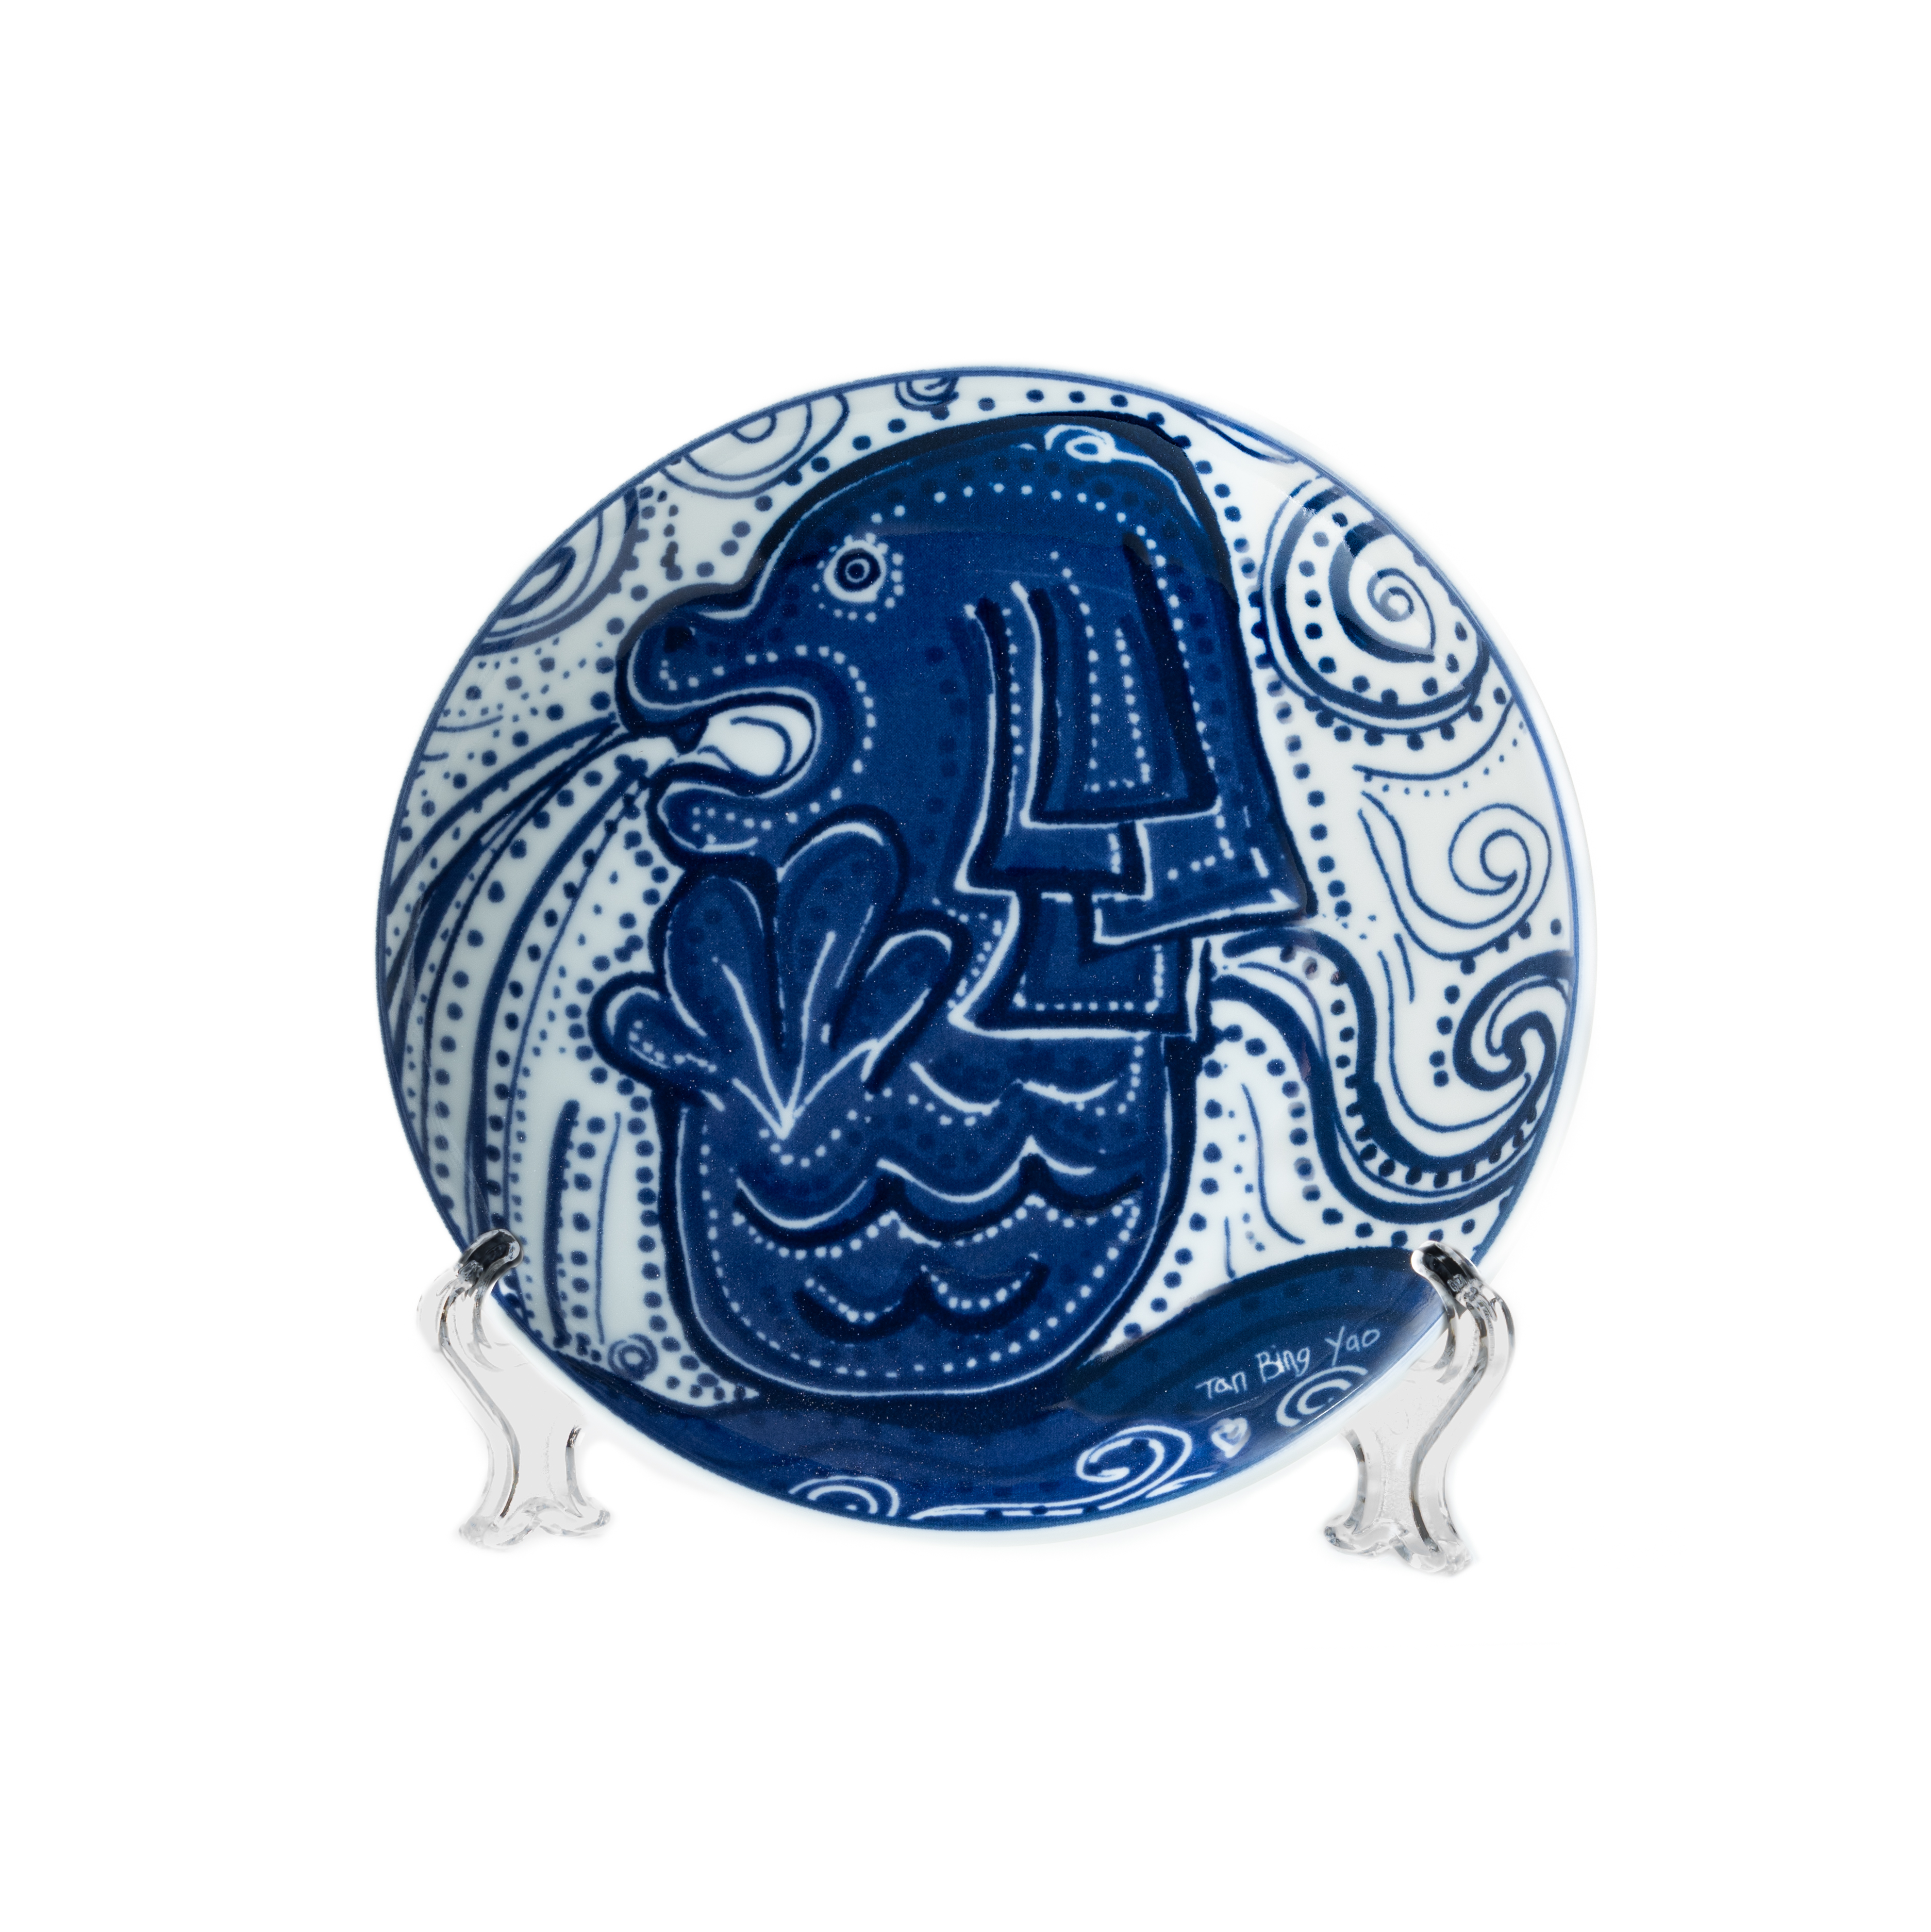 A white and blue porcelain plate with a hand-drawn Merlion design.